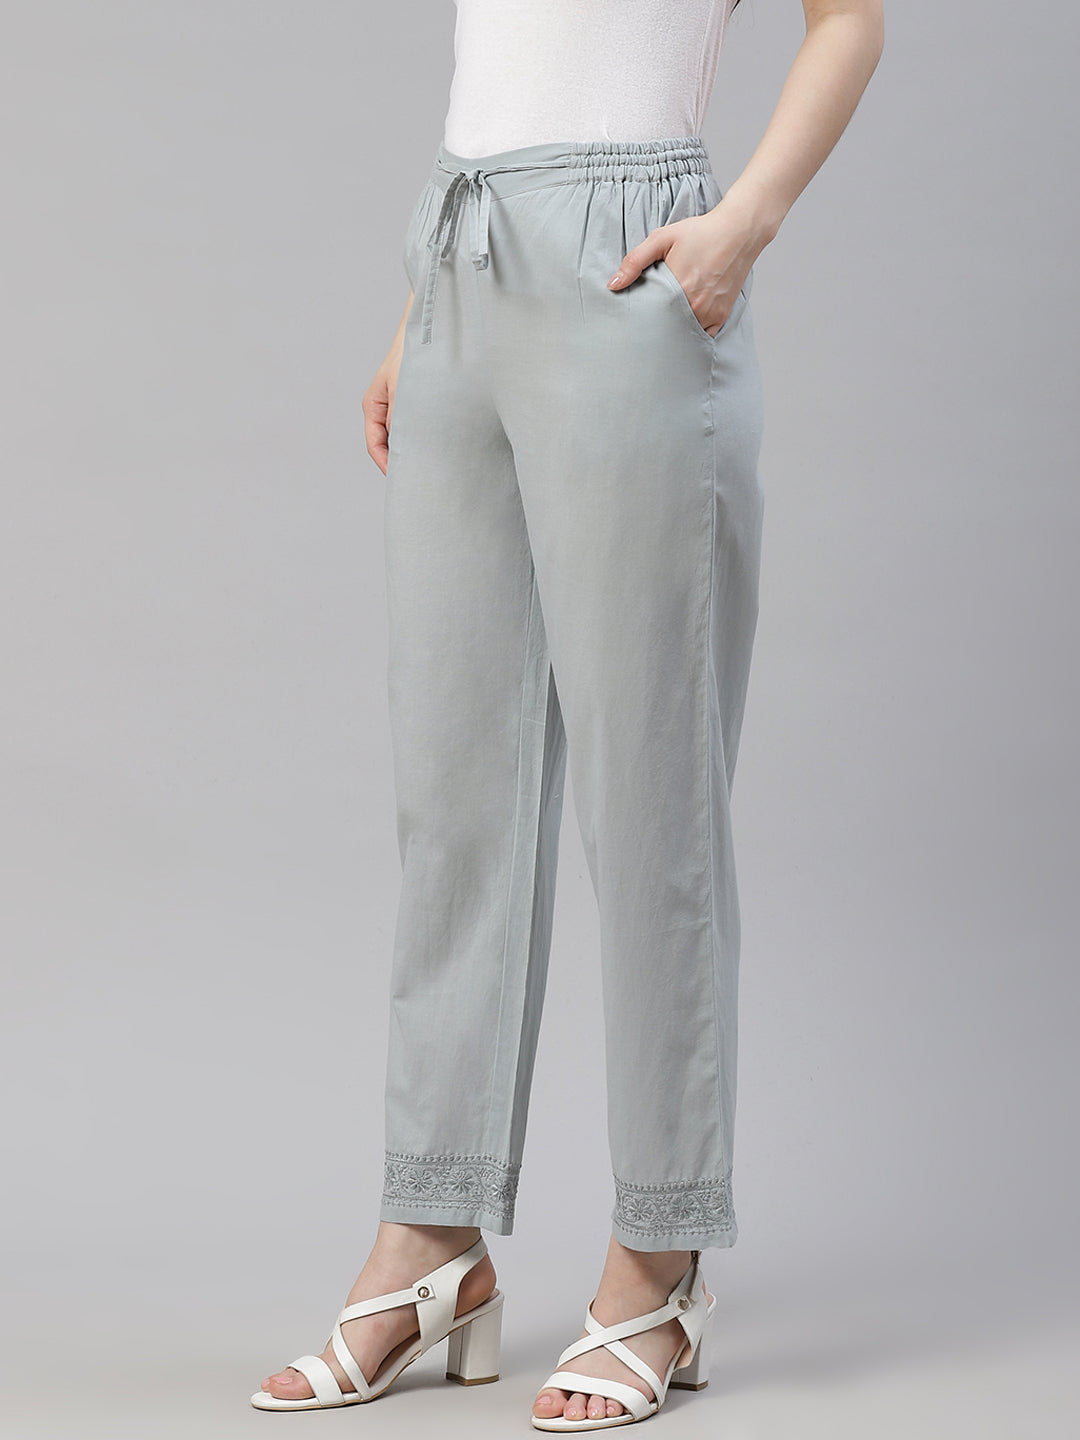 Buy Online Grey Cotton Flax Pants for Women  Girls at Best Prices in Biba  IndiaCORE14918AW19GRY